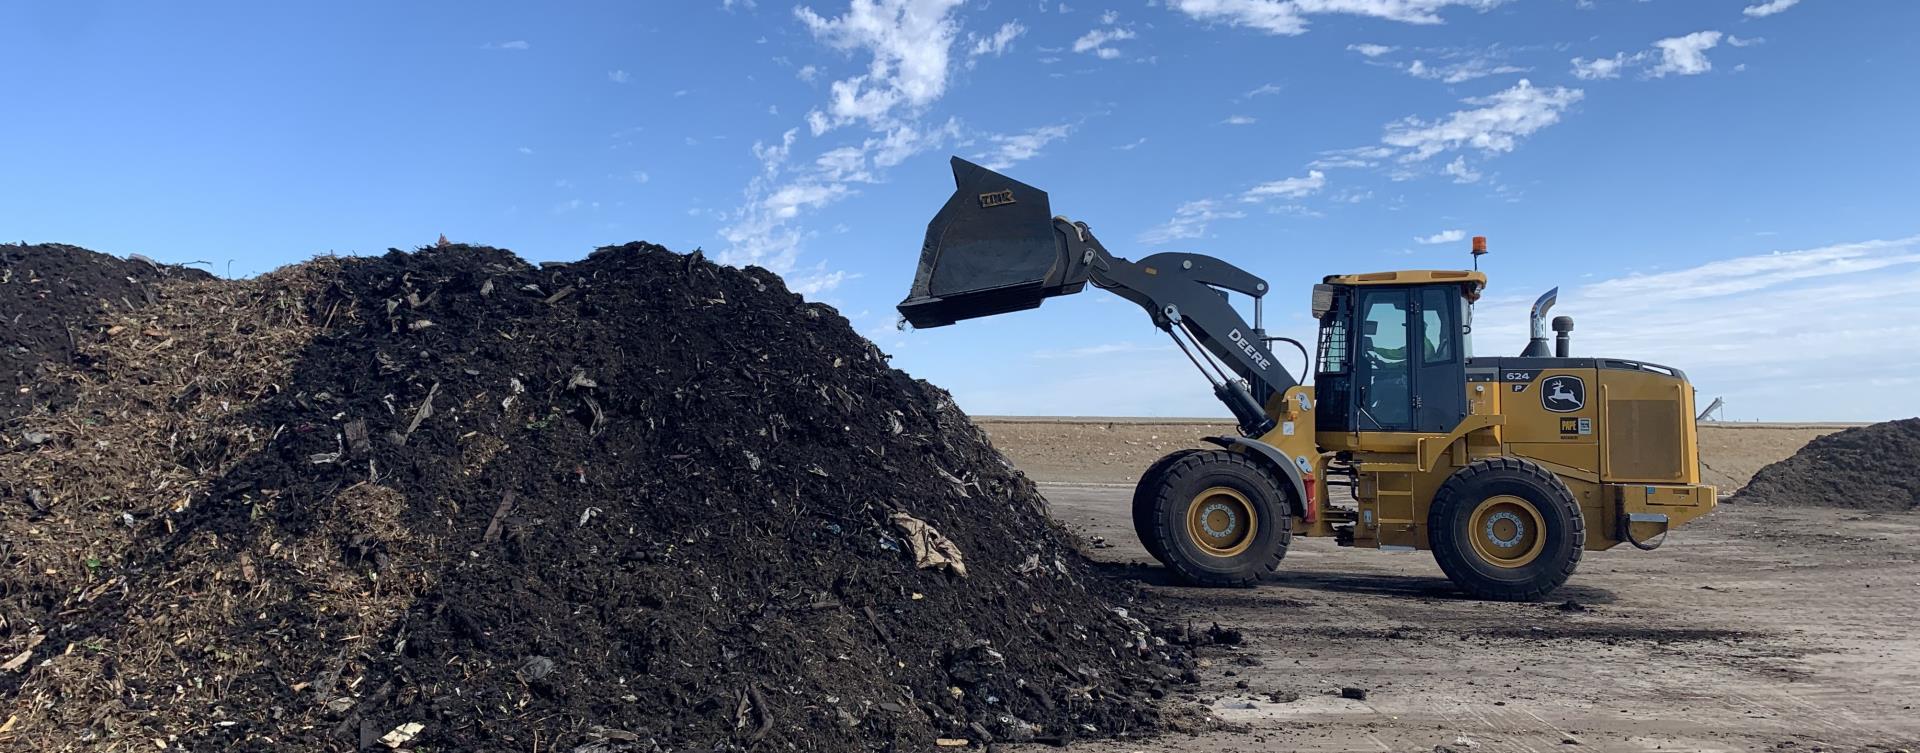 Large pile of compost outside on concrete pad with blue sky in the background. A tractor beside the pile has its bucket in air as it mixes the compost.